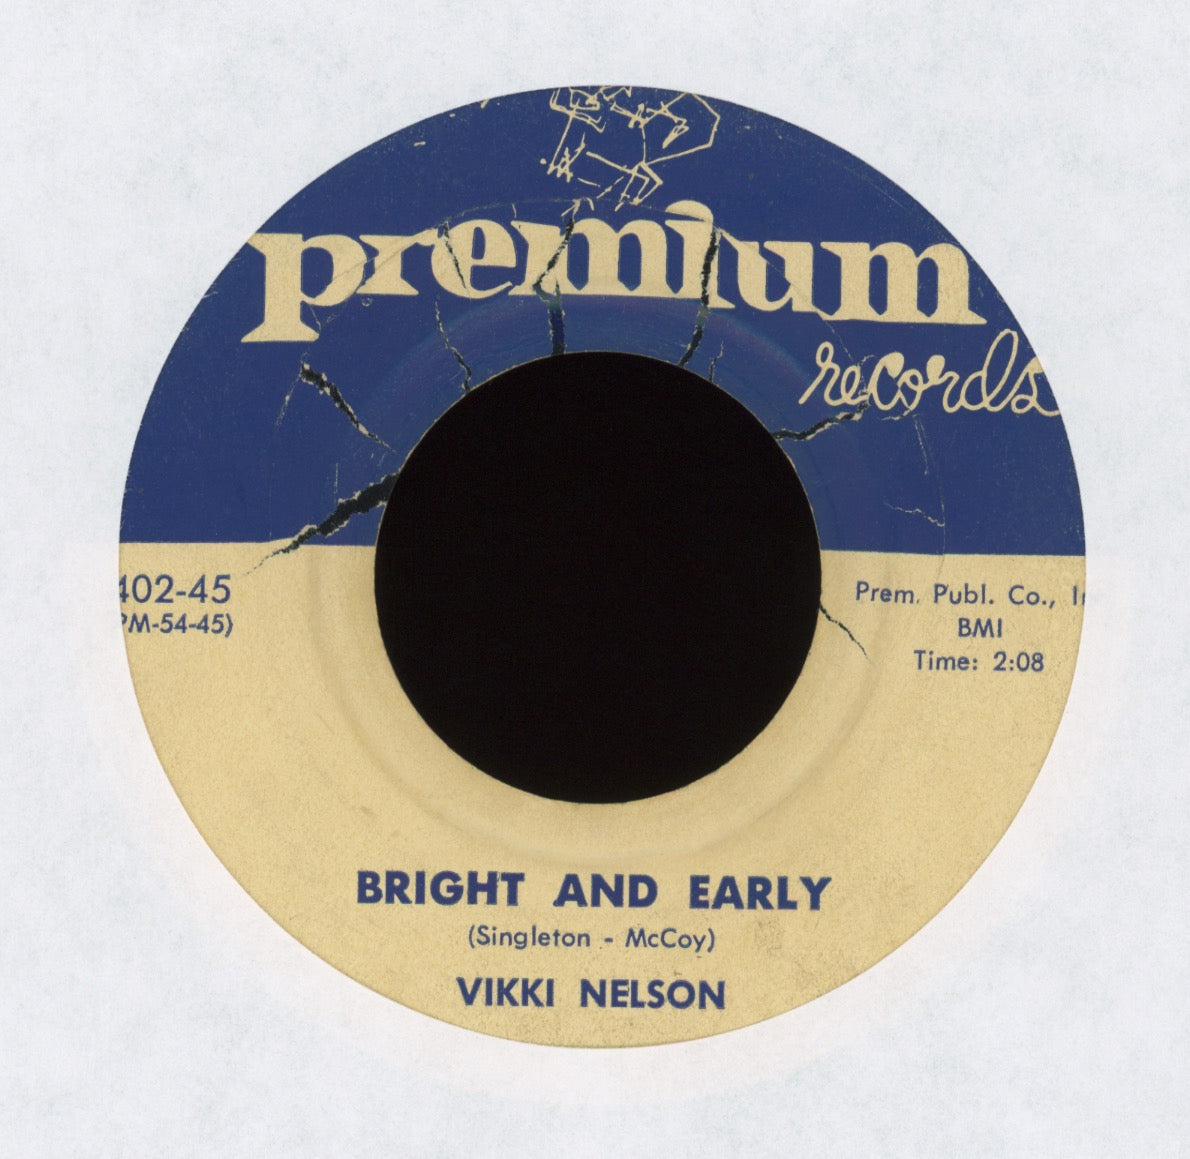 Vikki Nelson - Bright And Early on Premium